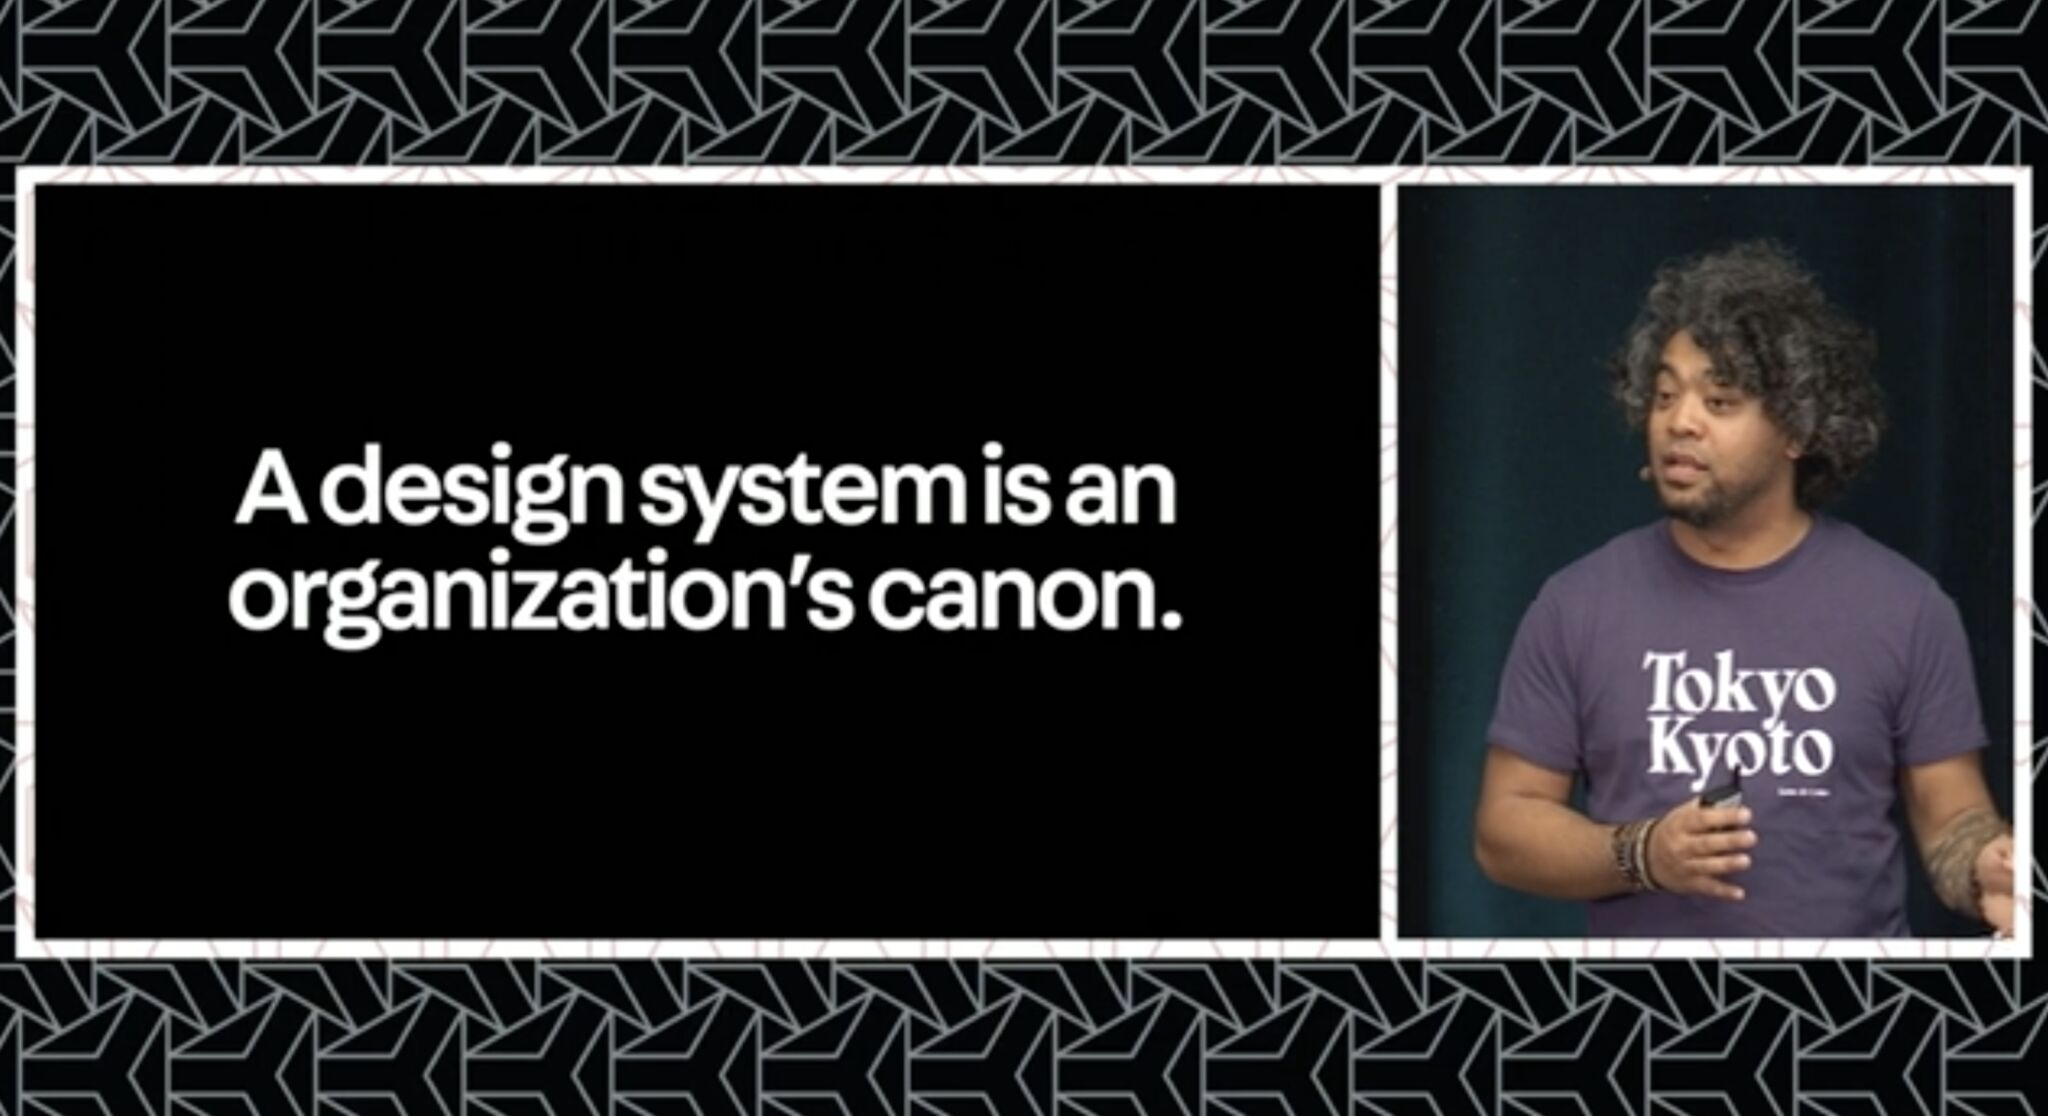 Dan Mall - A design system is an organization's canon.